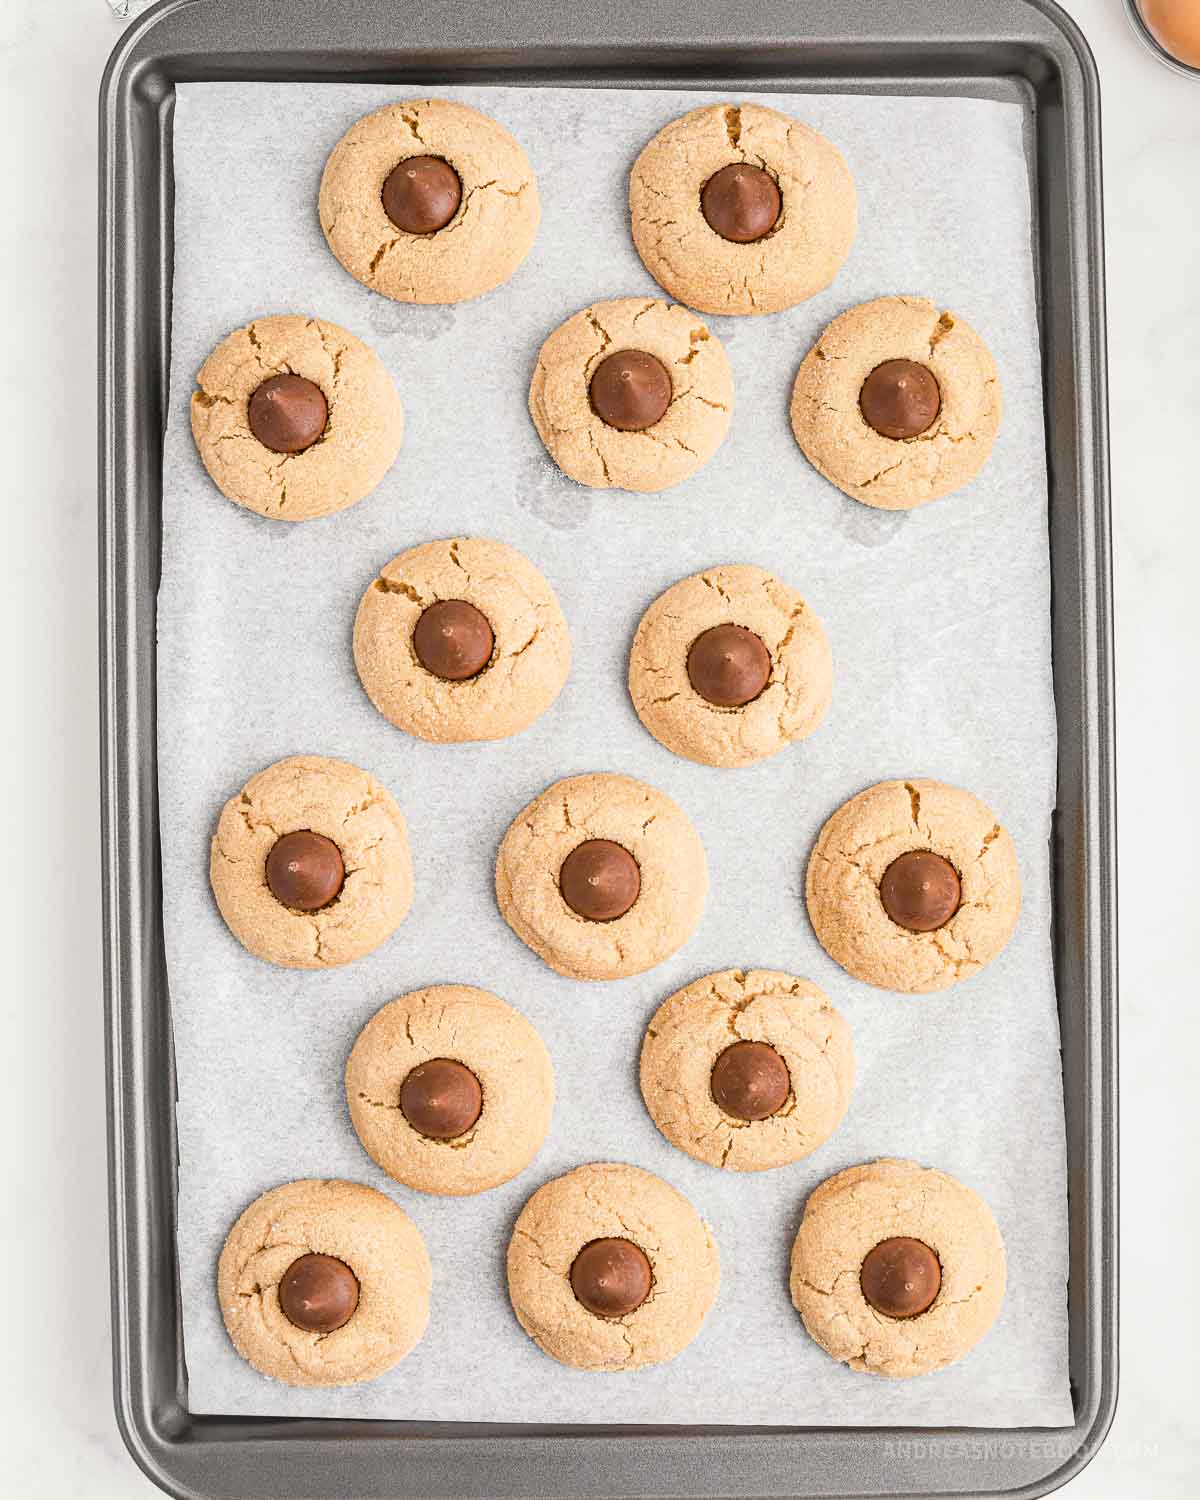 Hershey kiss placed on baked peanut butter cookies on baking sheet.